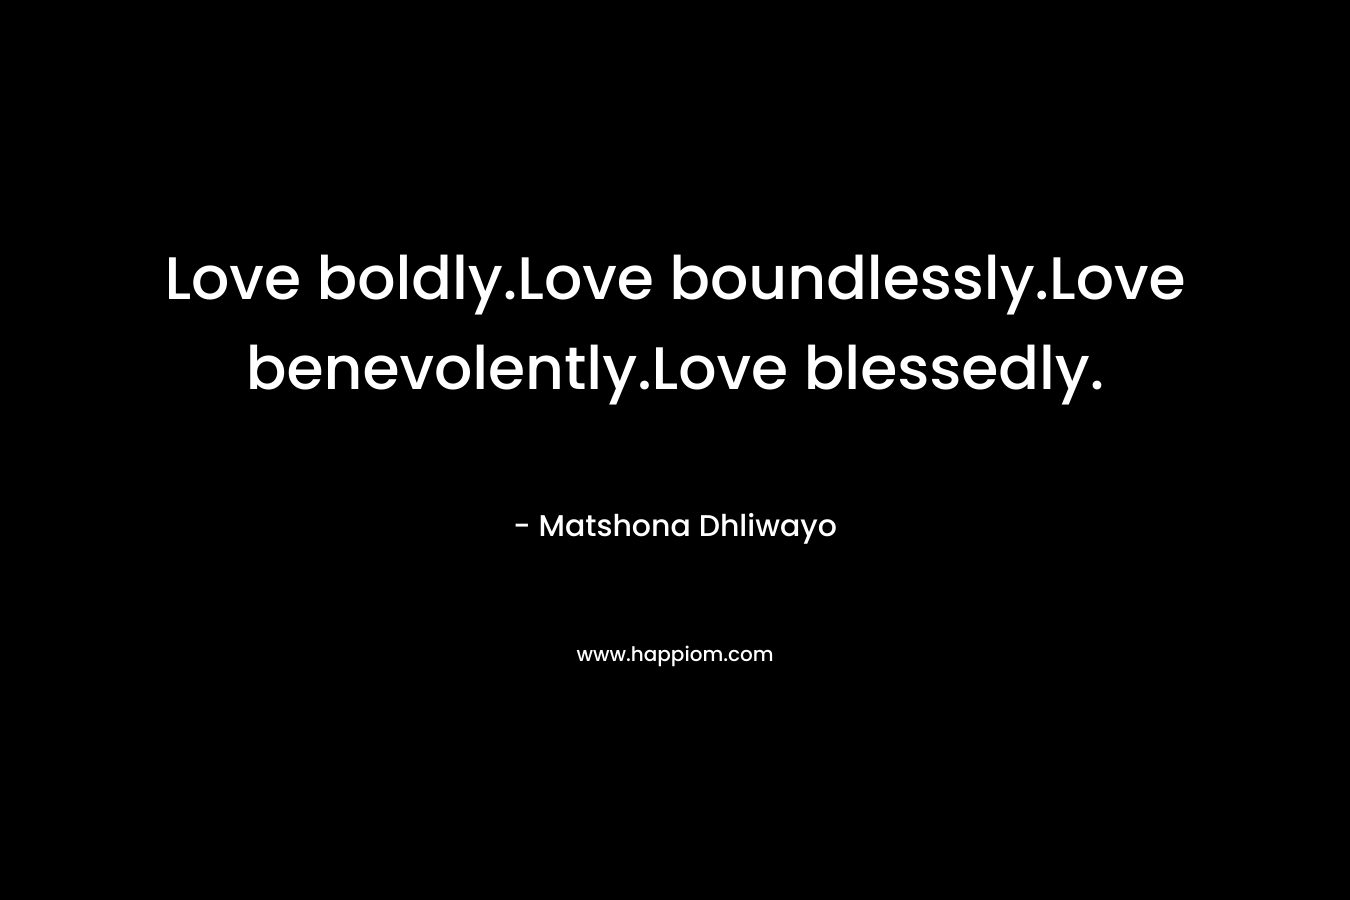 Love boldly.Love boundlessly.Love benevolently.Love blessedly.